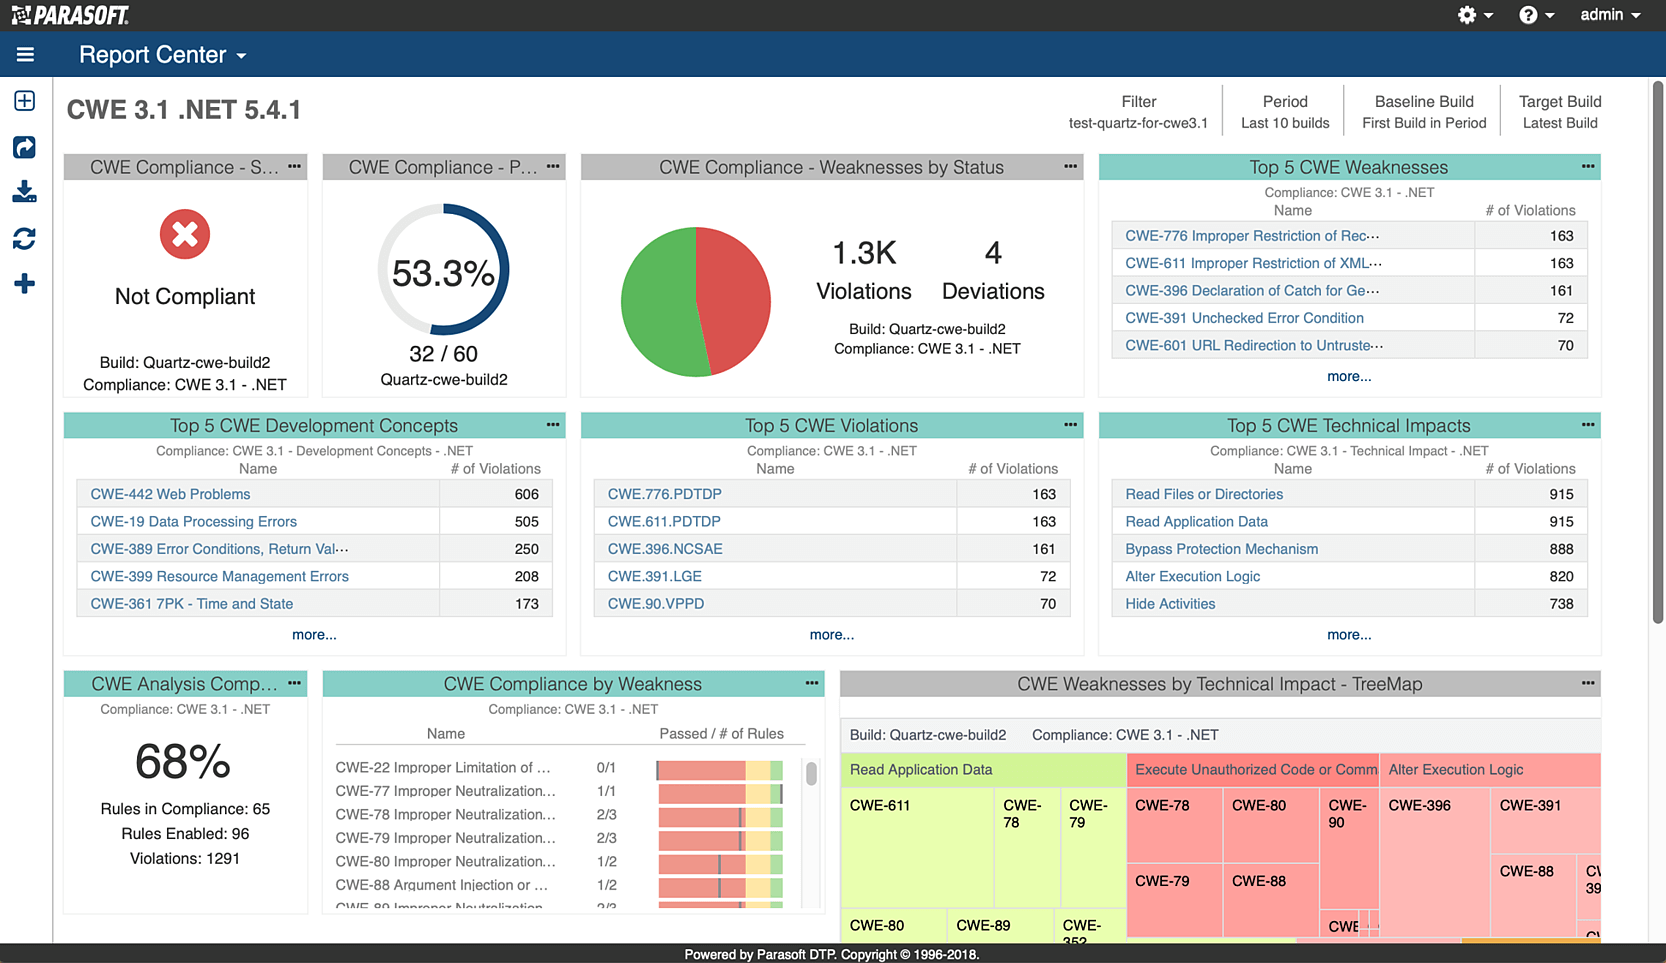 Screenshot of Parasoft's report center dashboard. where managers and security leads can assess projects based on security standards such as CWE.